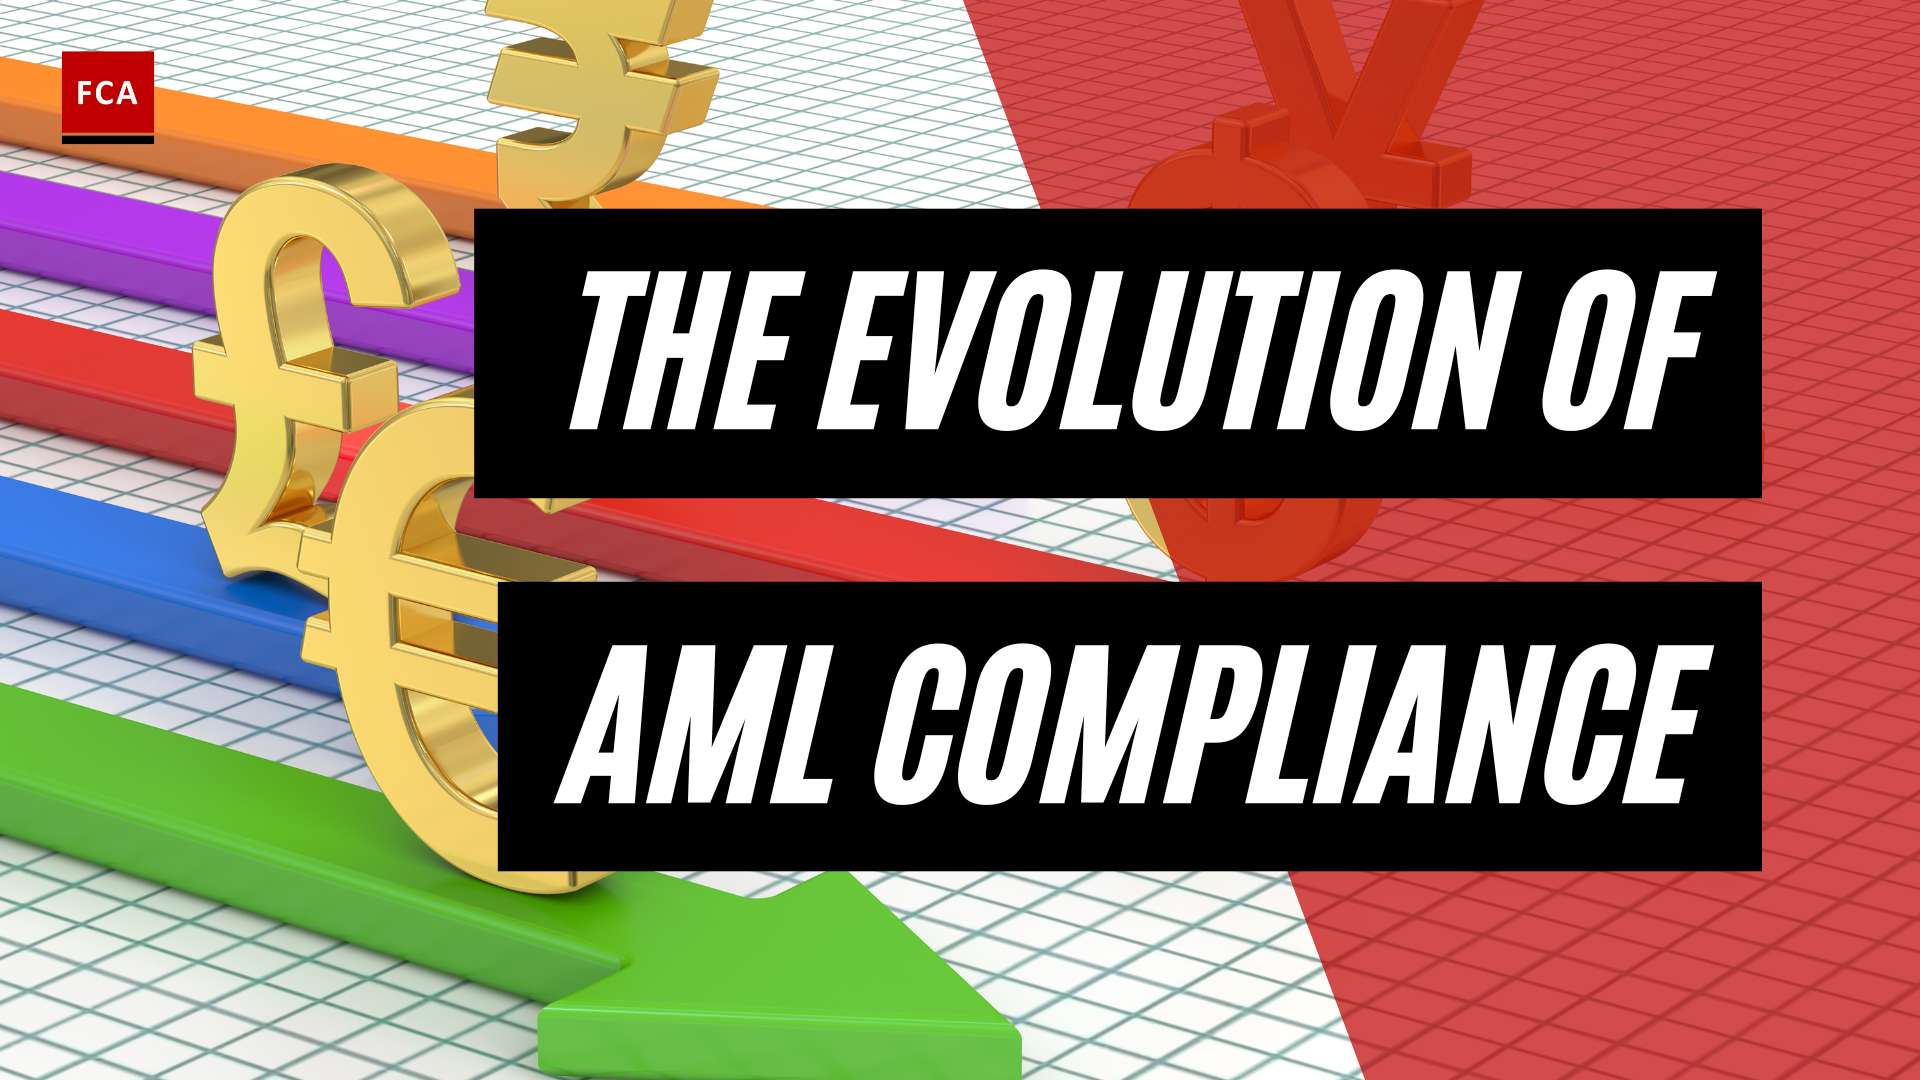 The Evolution Of Aml Compliance: Confronting The Globalization Impact